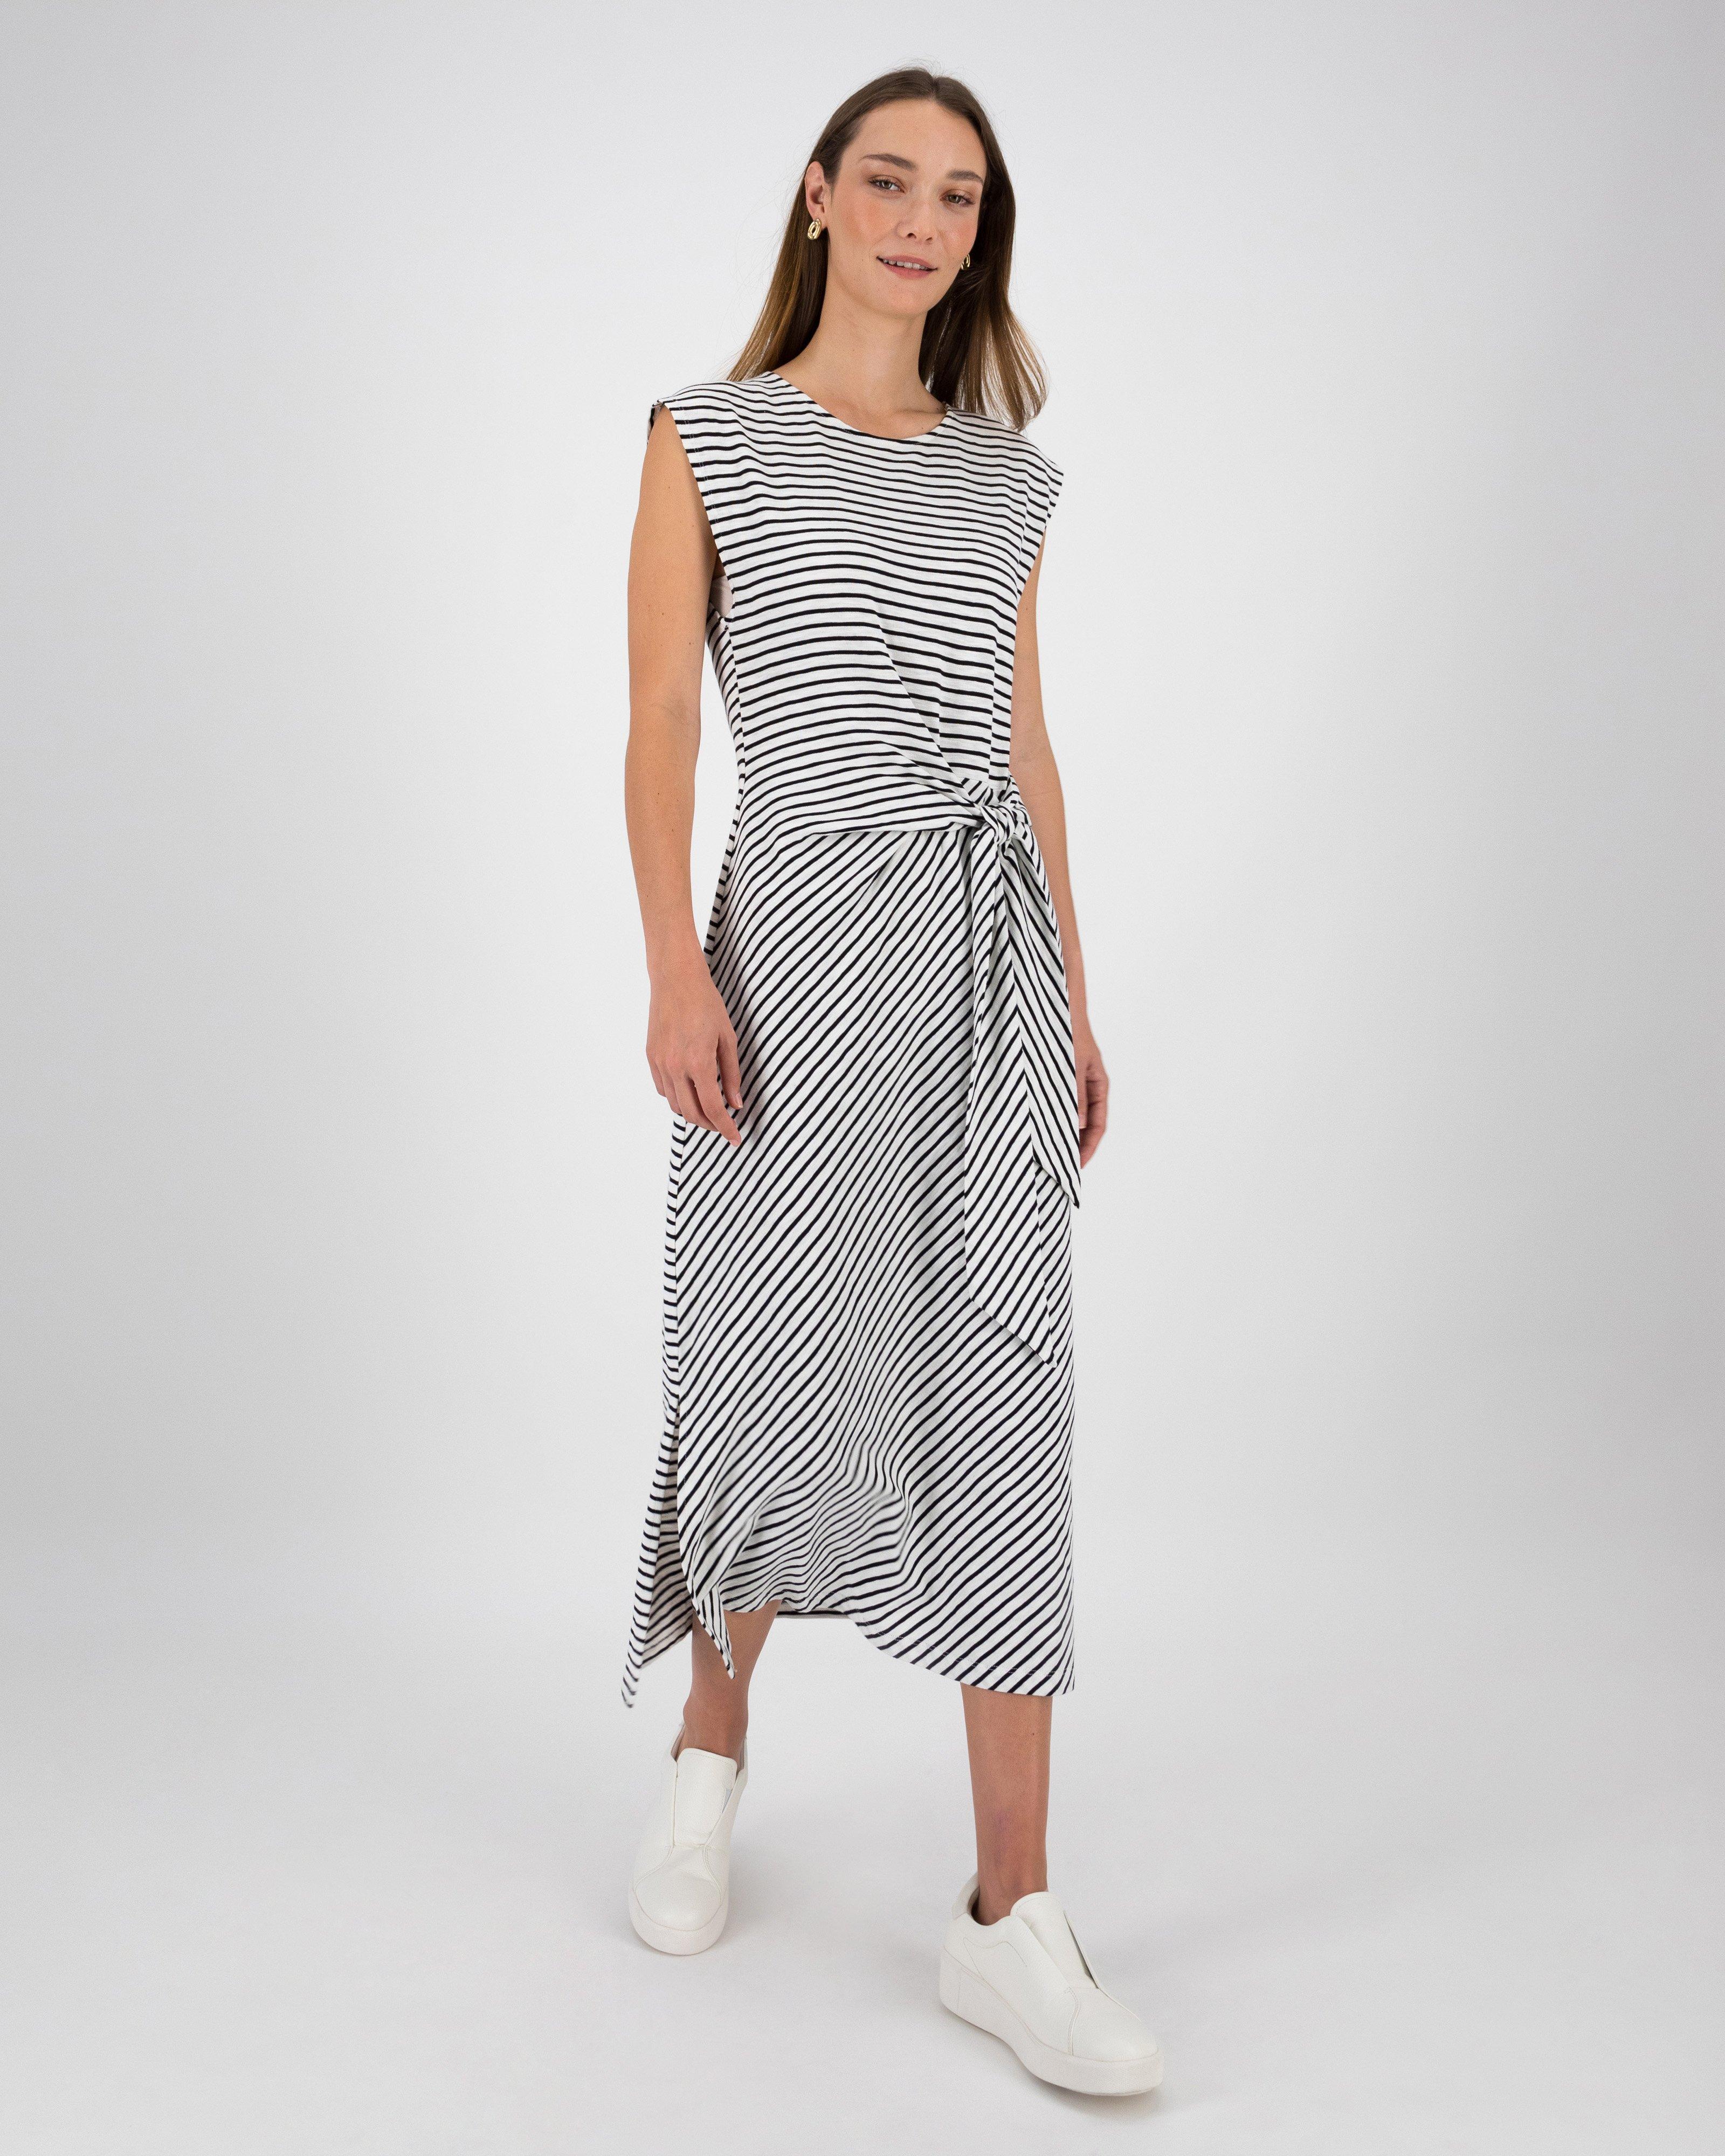 Emory Stripe Knit Dress - Poetry Clothing Store